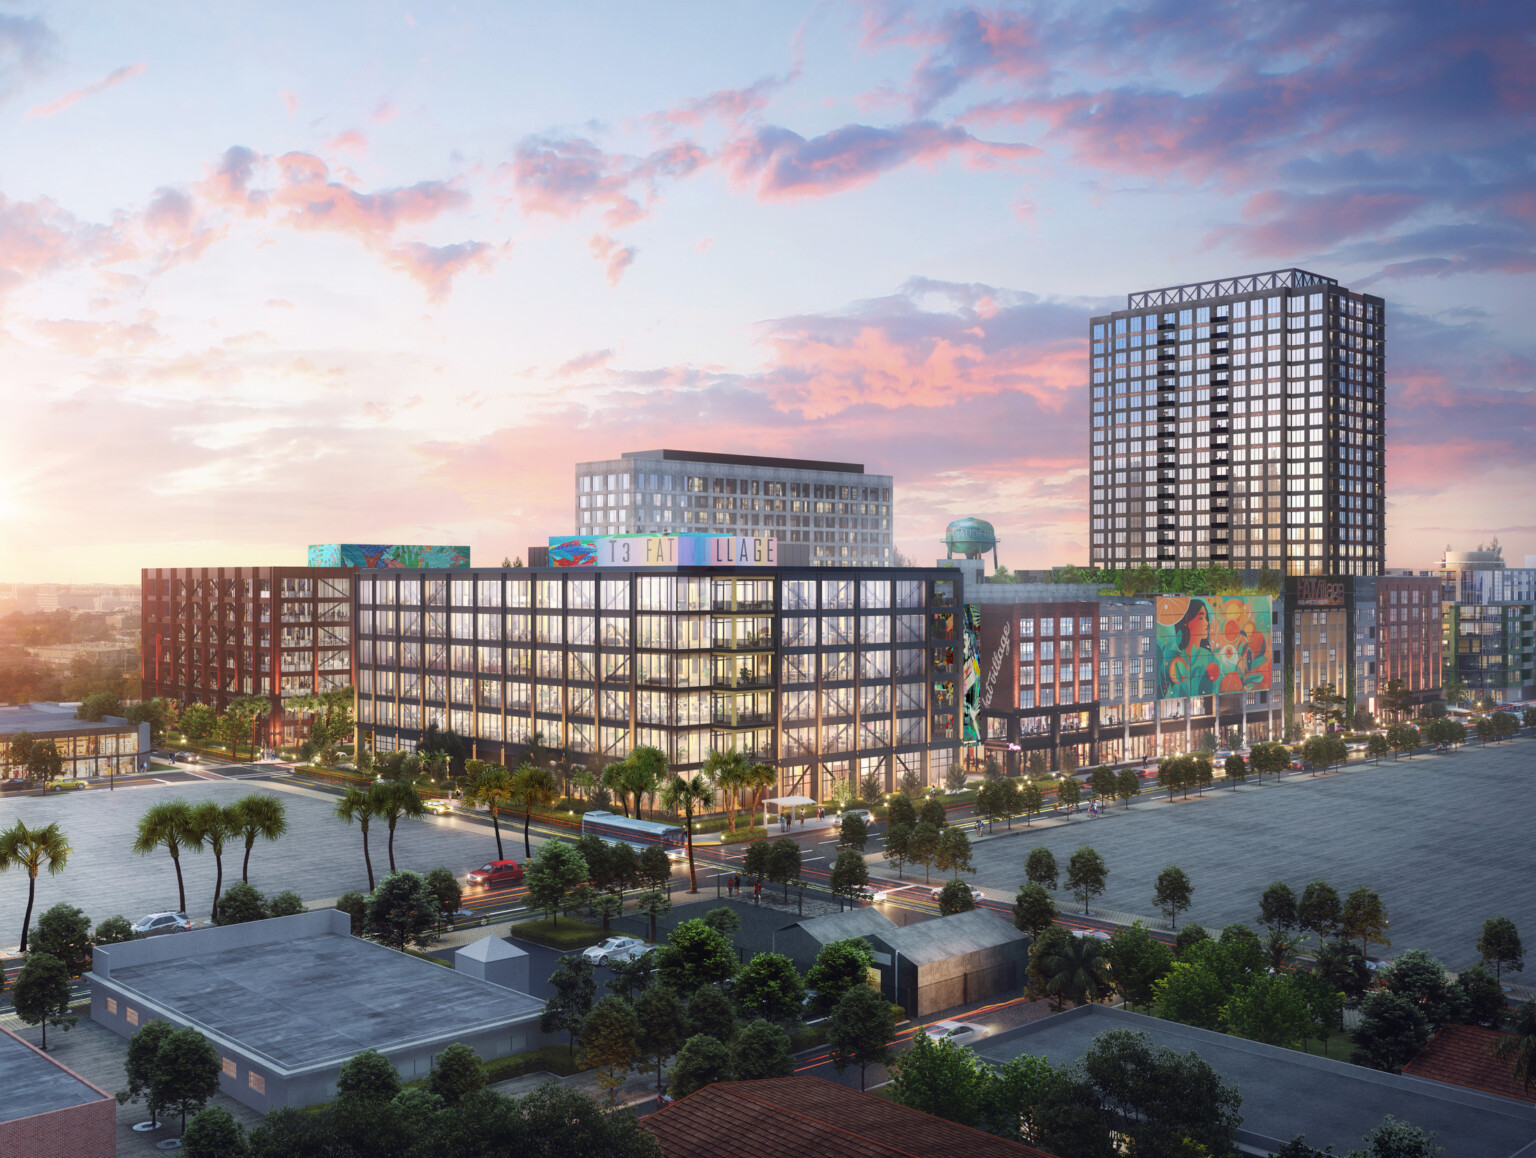 Rendering of a new office building in Fort Lauderdale showing a colorful sunset above multistory buildings with colorful murals